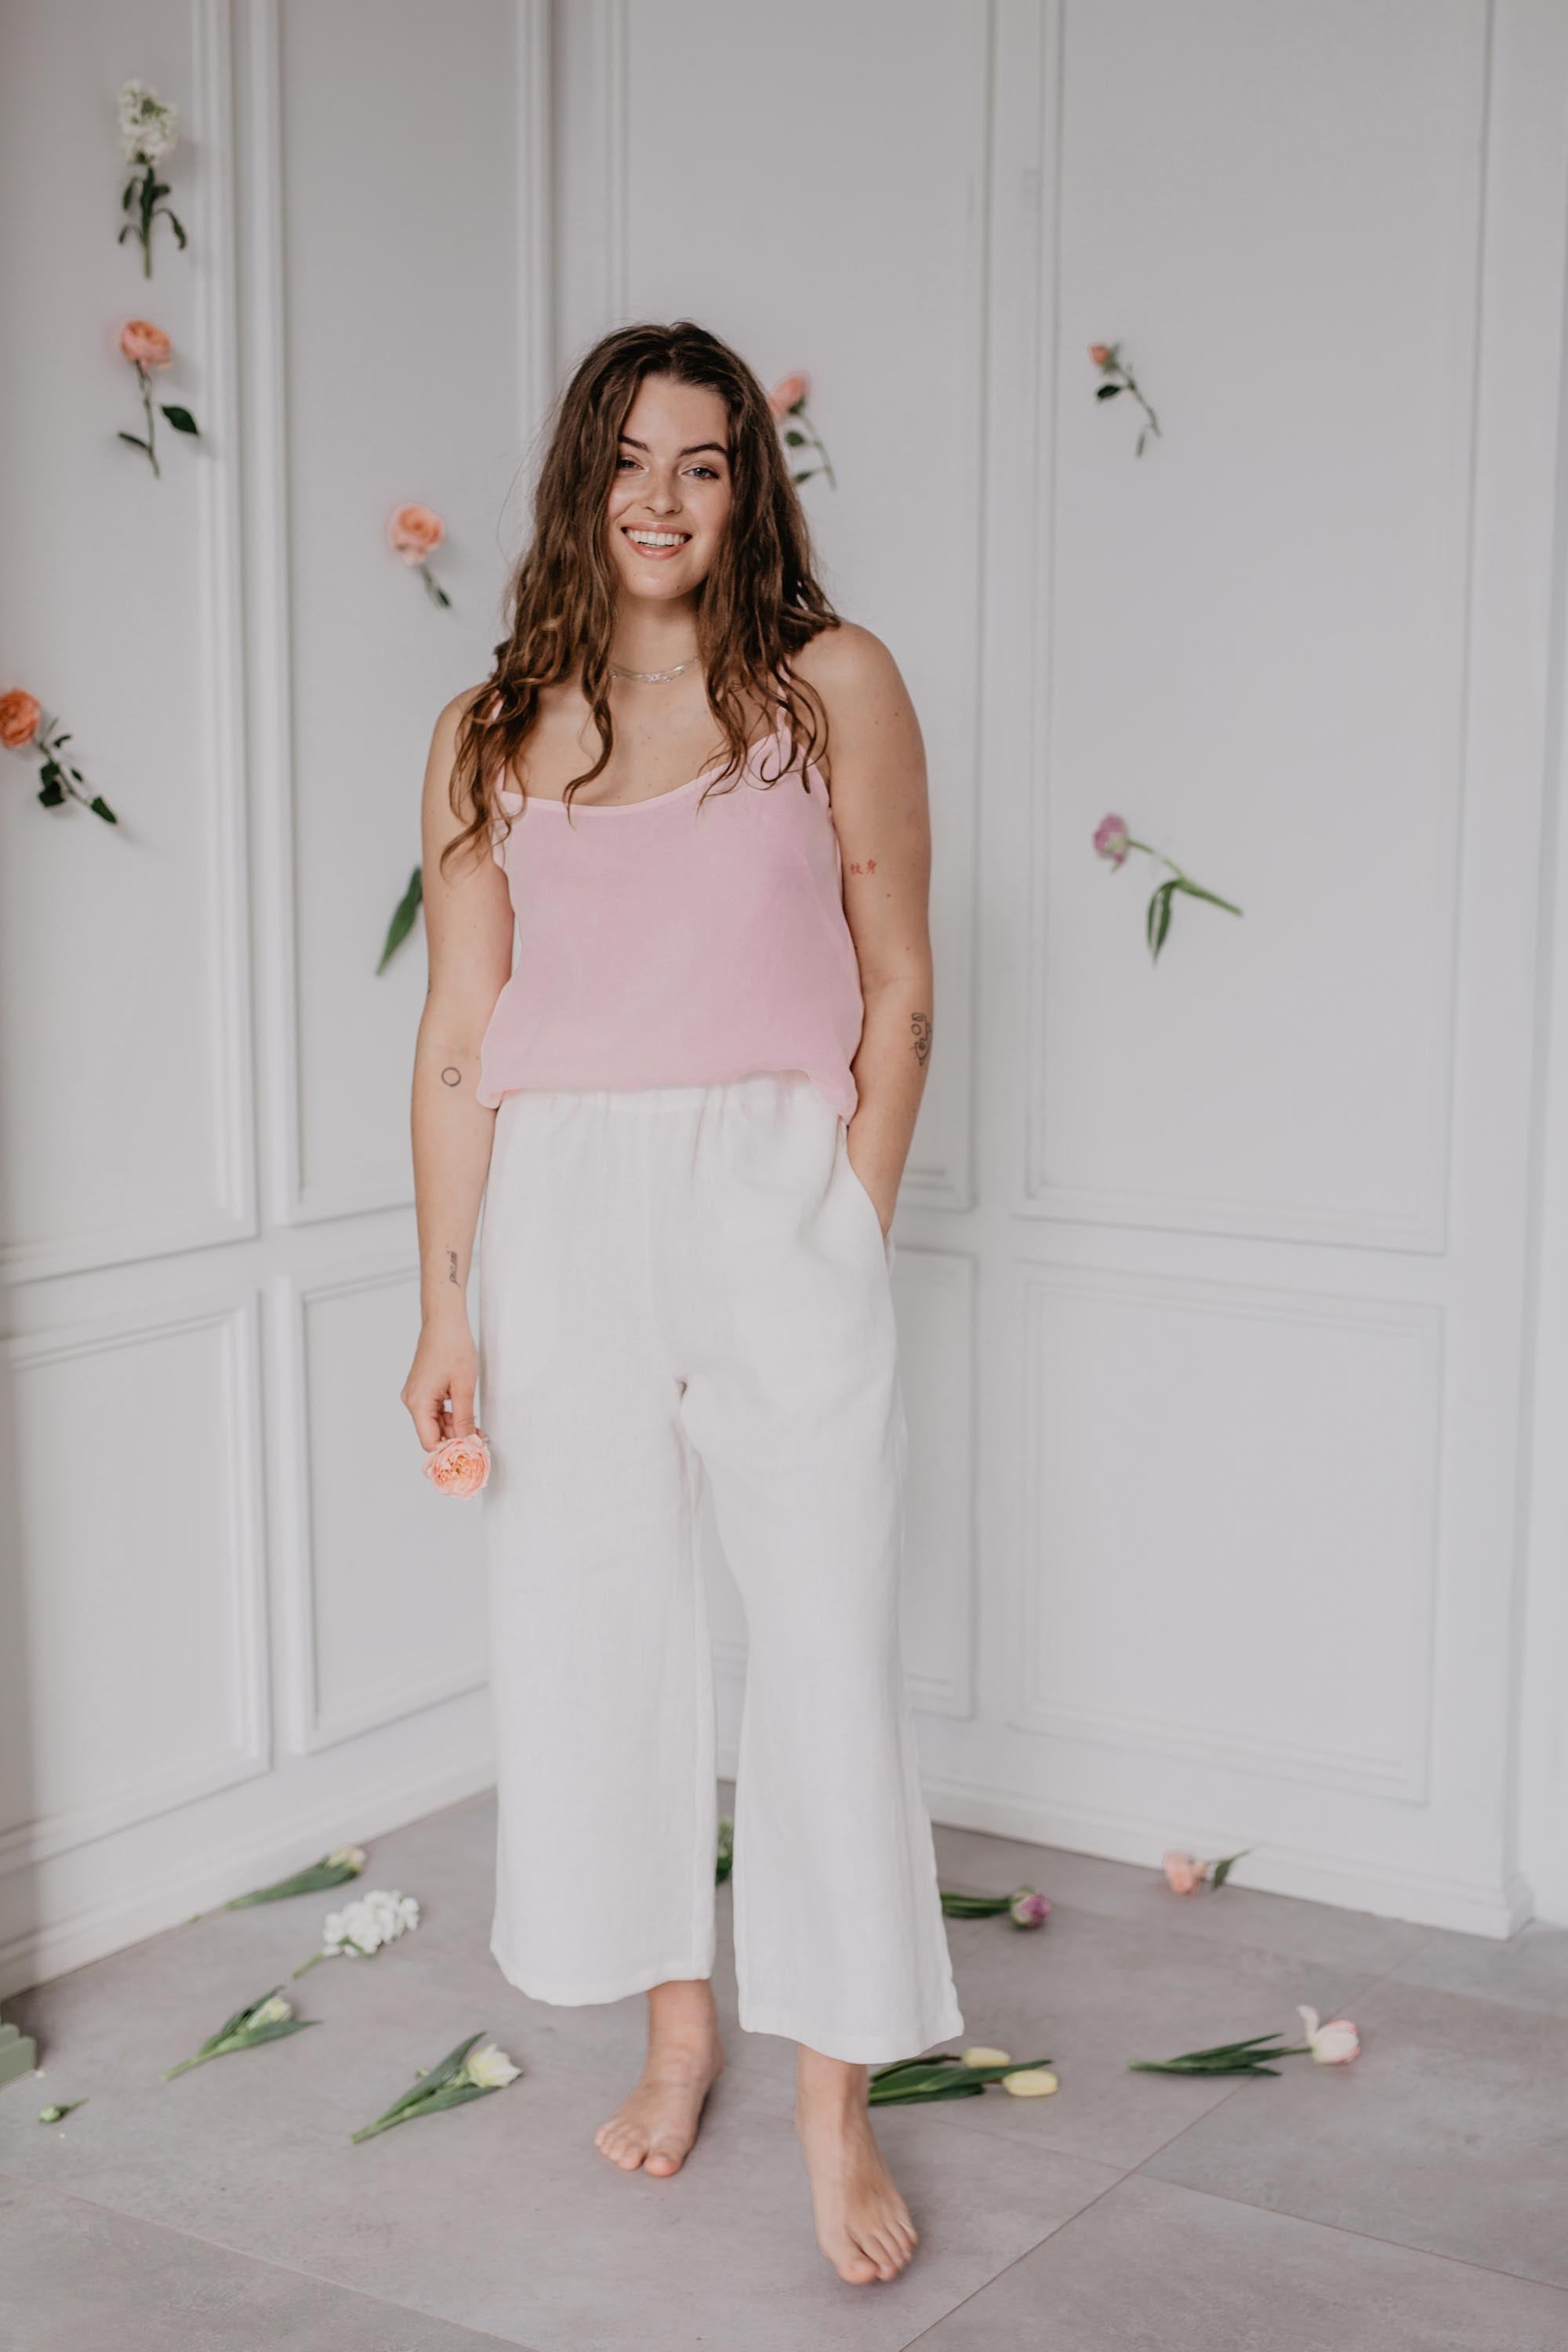 Woman In Flowery Room Wearing White Linen Pants and Pink Linen Top By Amourlinen